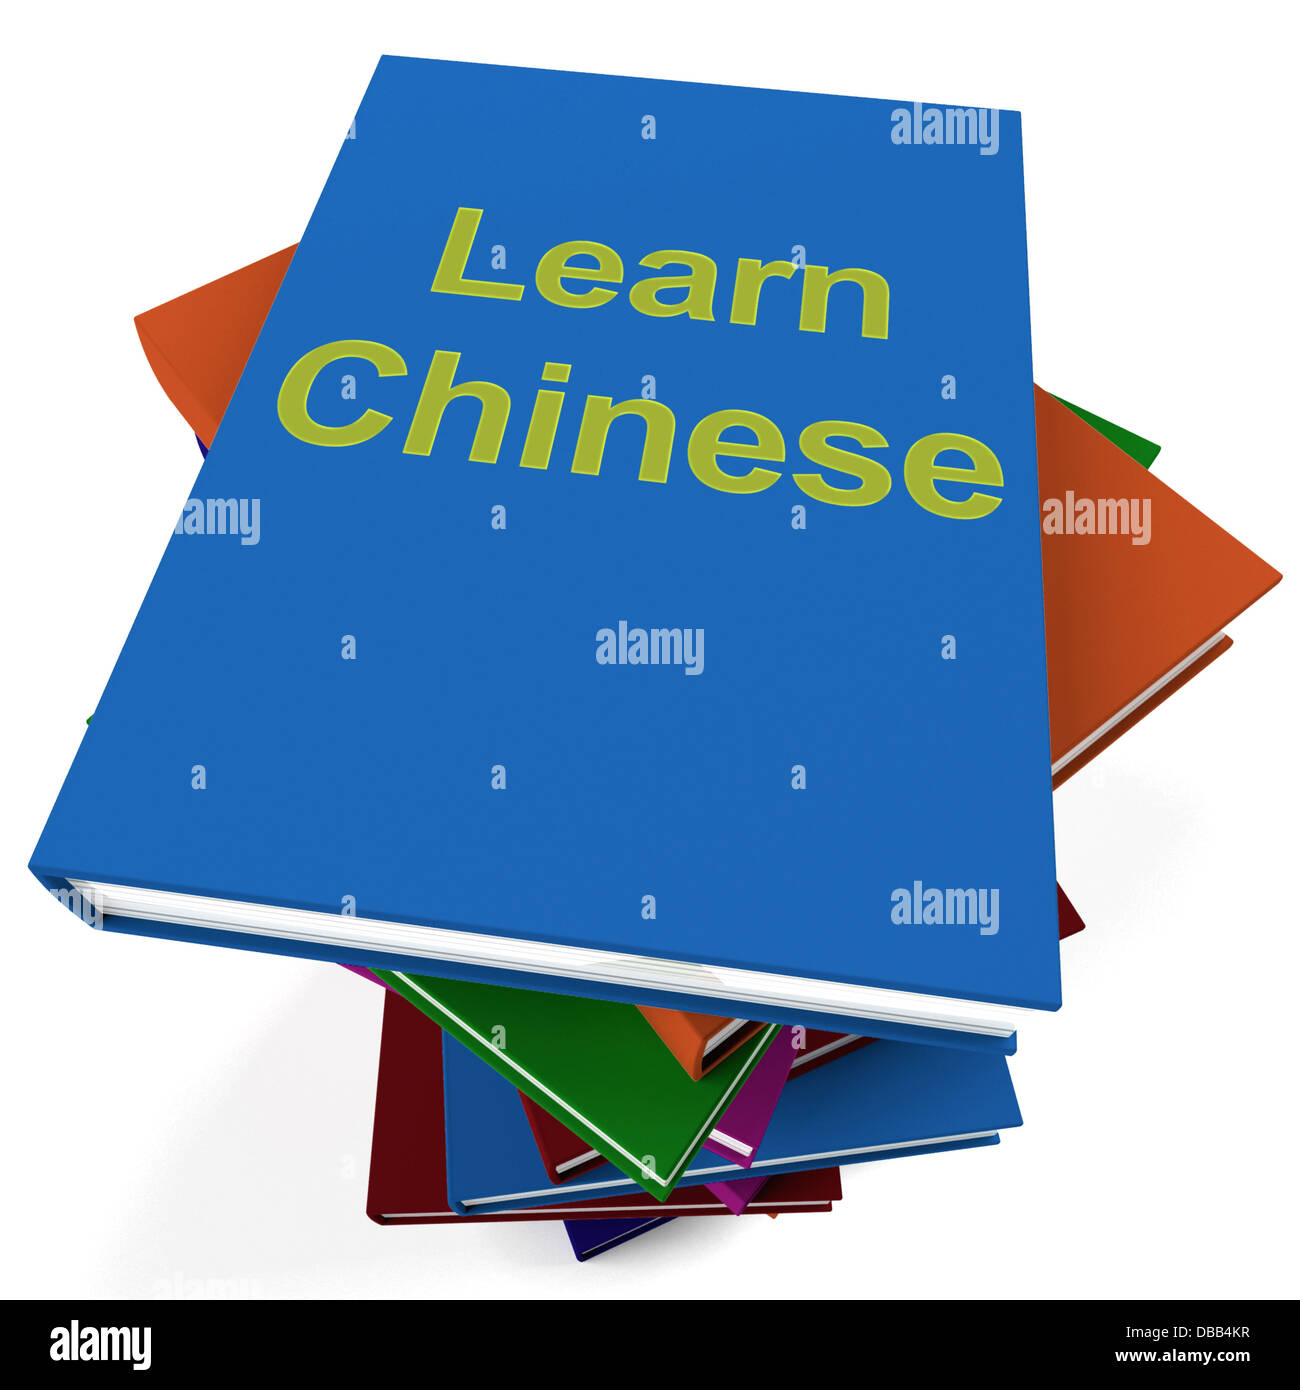 Learn Chinese Book For Studying A Language Stock Photo